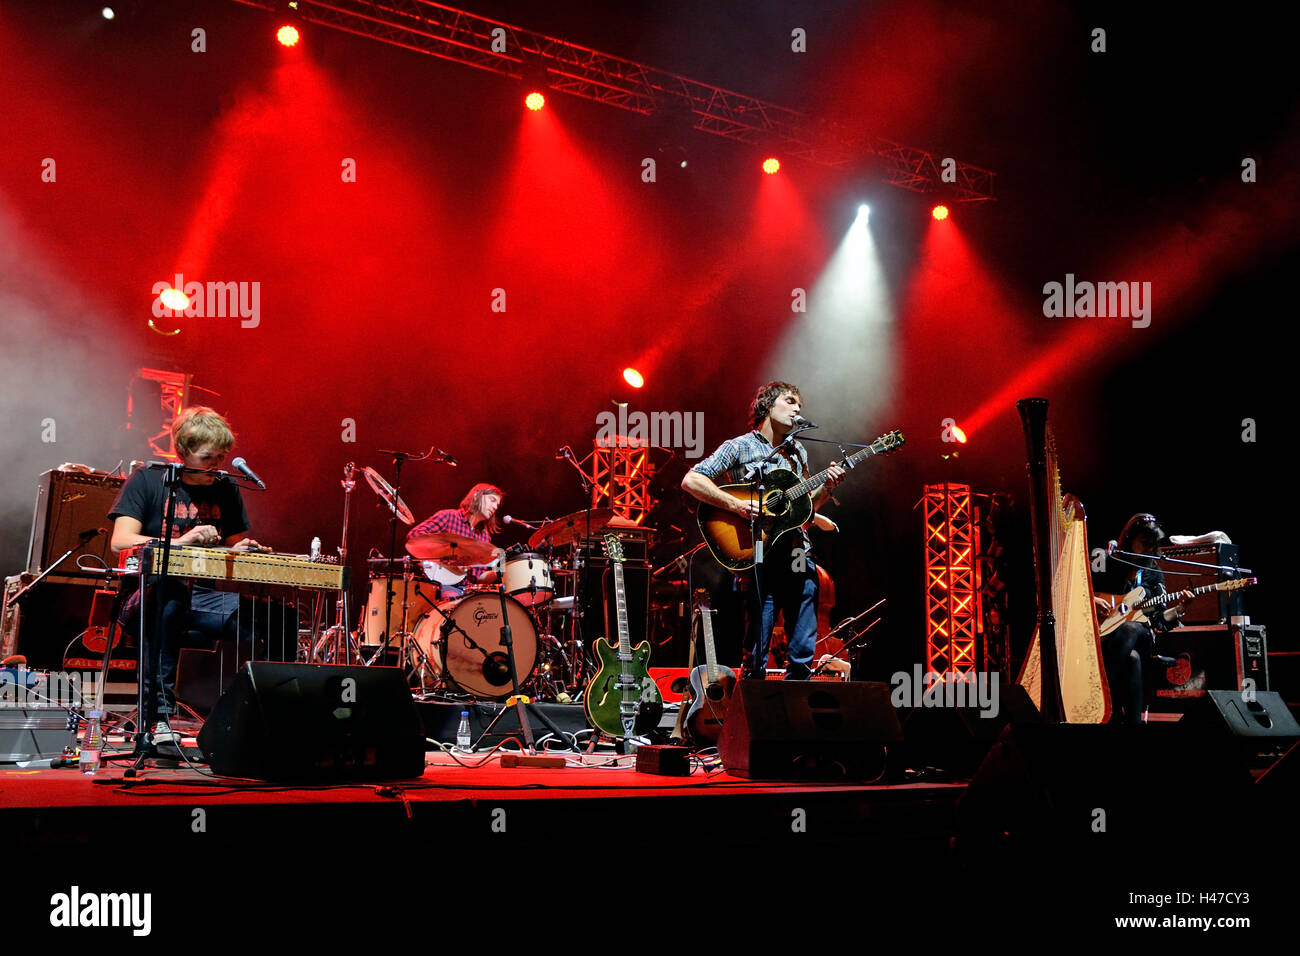 BILBAO, SPAIN - OCT 31: The Barr Brothers (band) live performance at Bime Festival on October 31, 2014 in Bilbao, Spain. Stock Photo